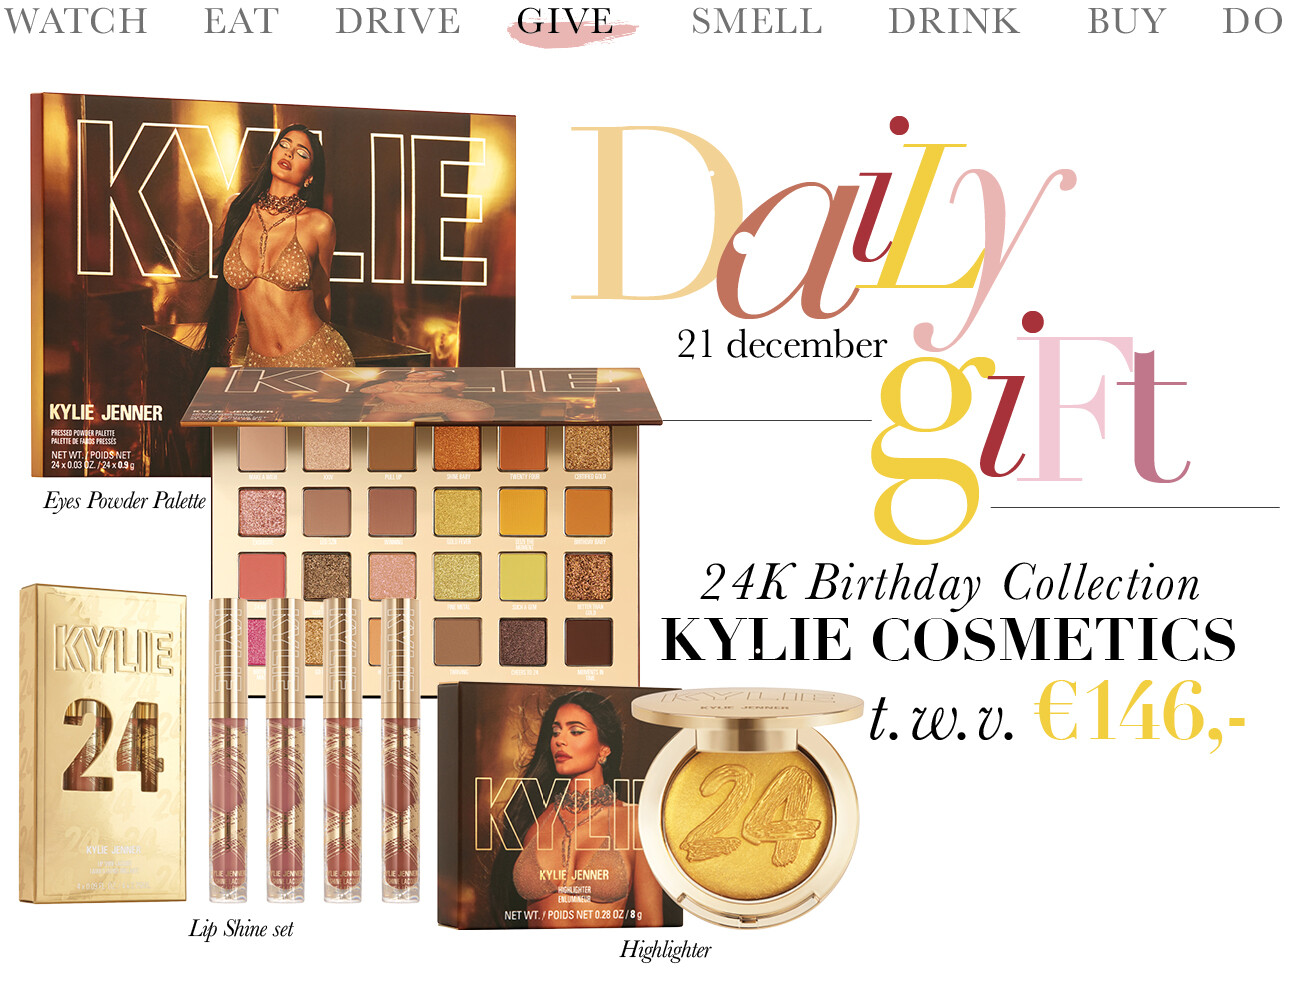 Today We Give Kylie Cosmetics